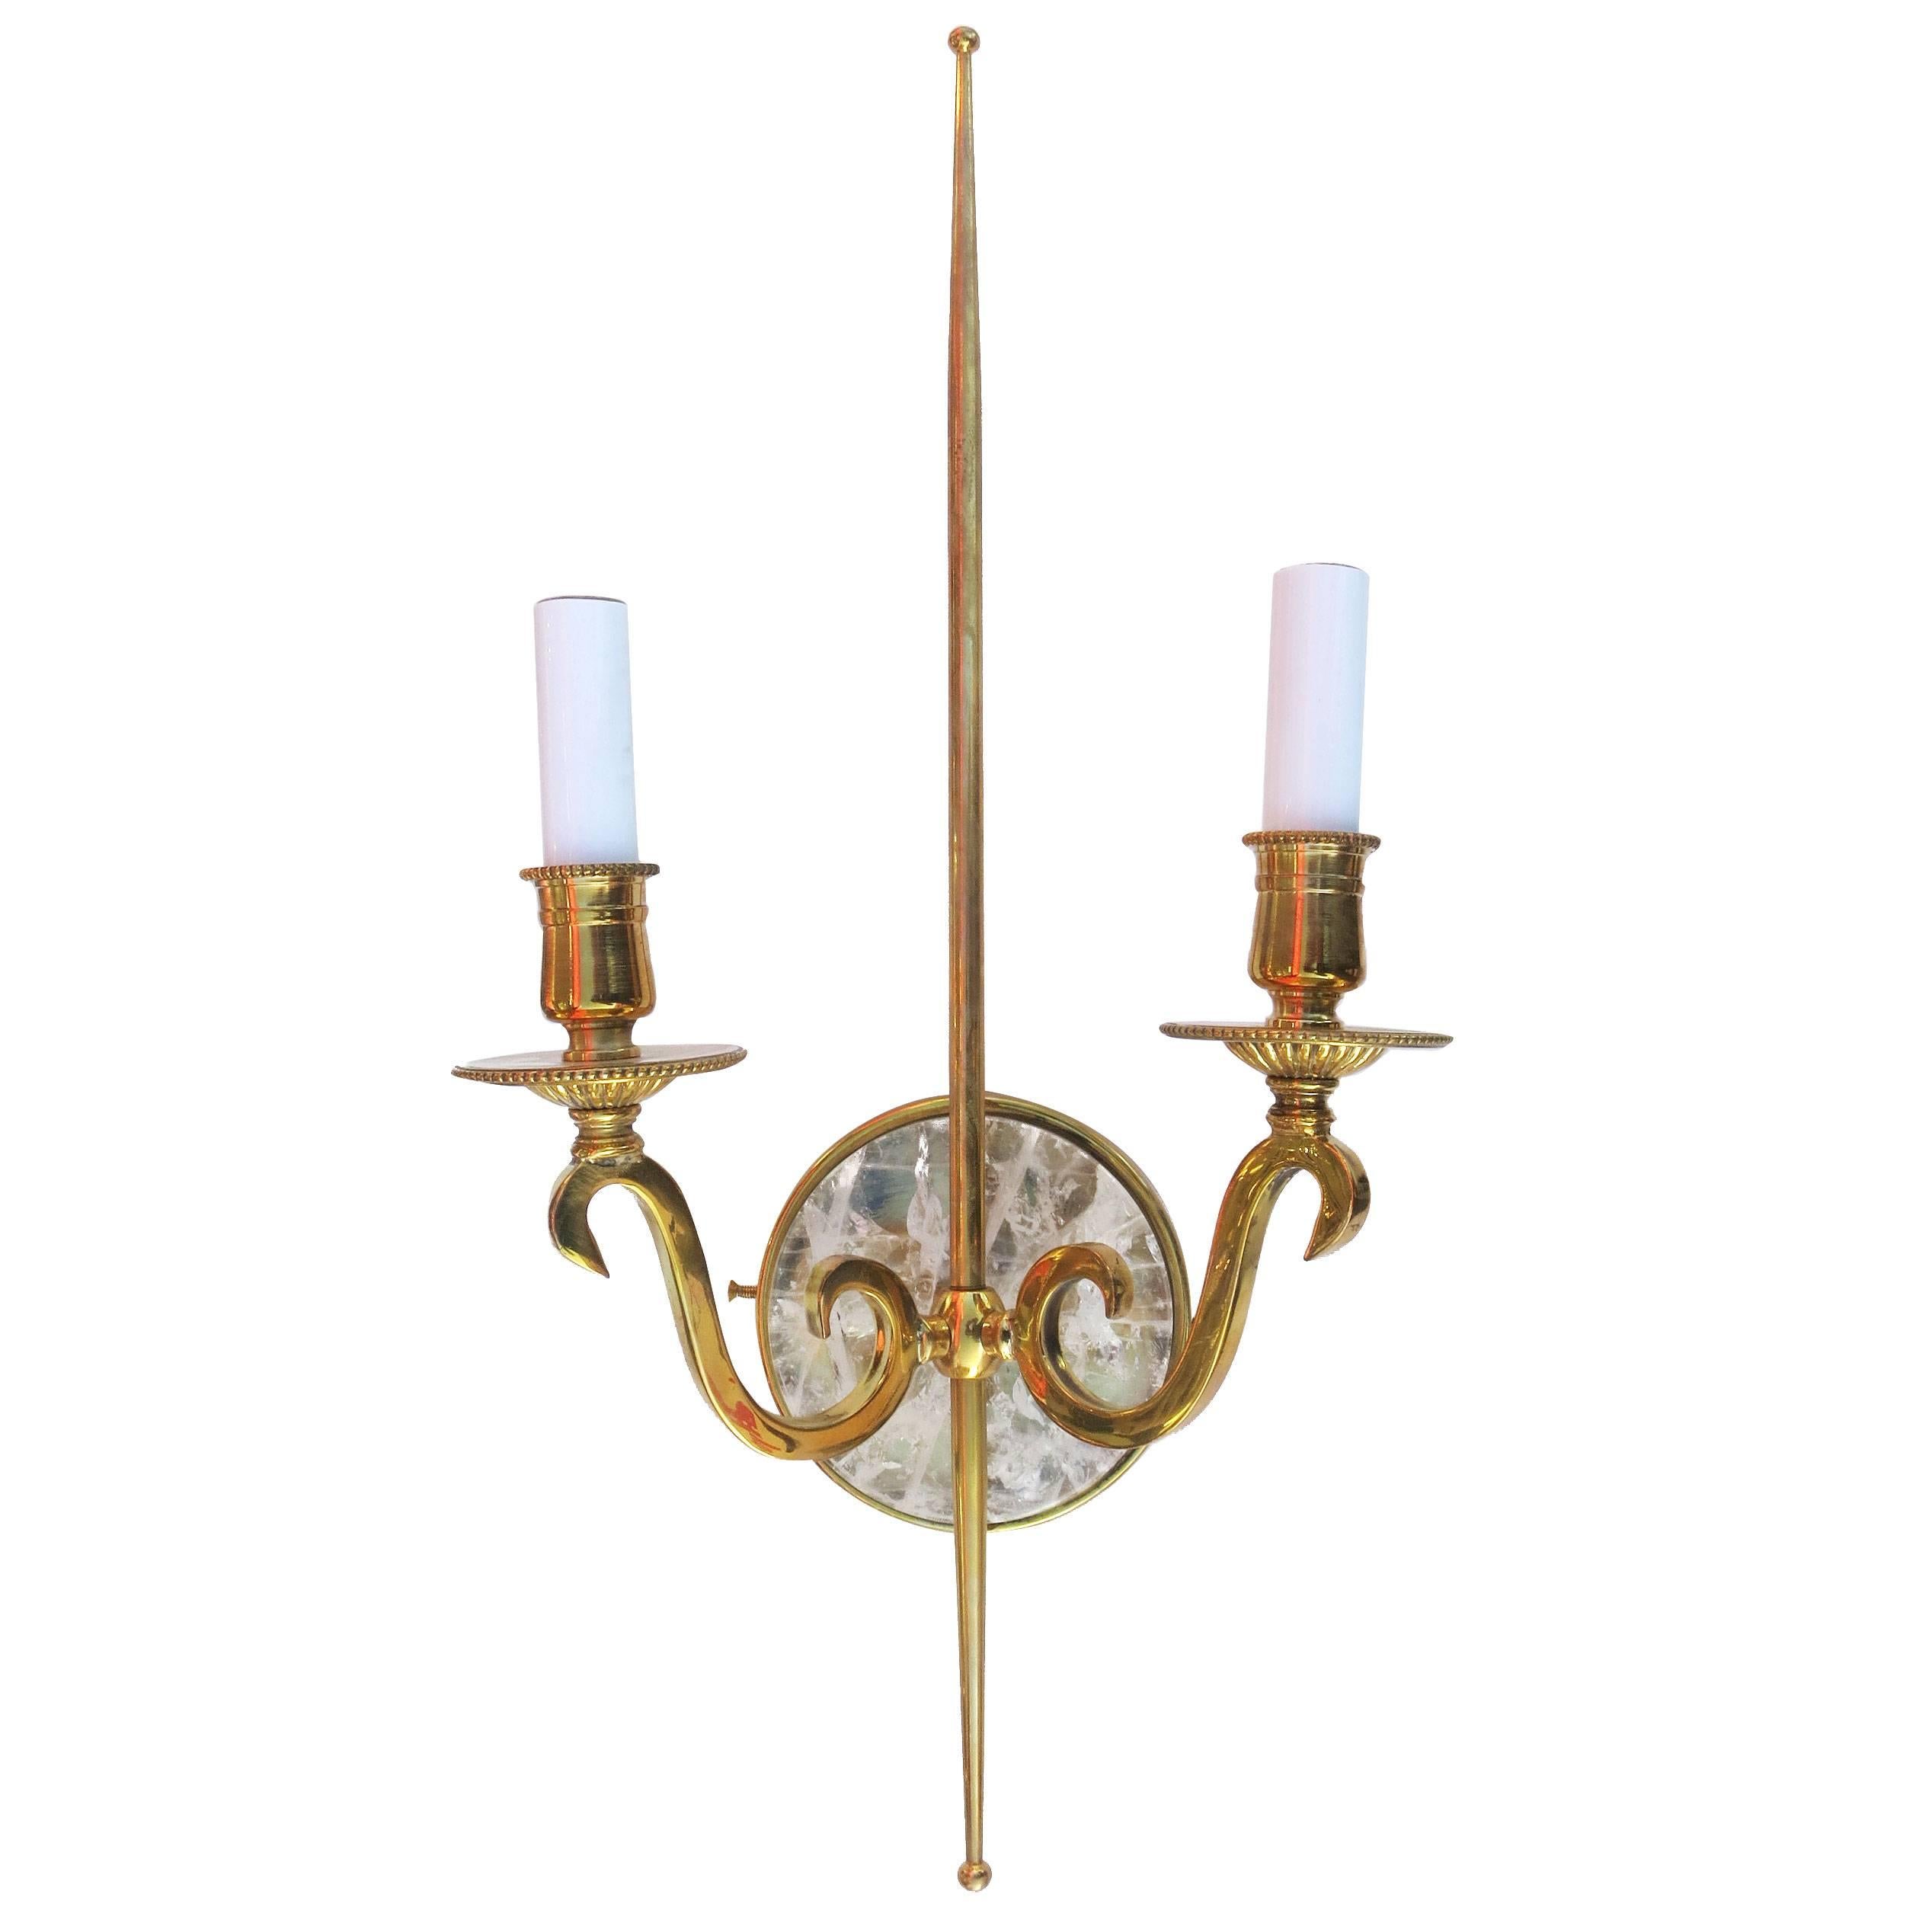 High style double arm wall sconce made from solid brass castings with a natural rock crystal stone center. 

Product handcrafted in the USA with the highest quality materials and over 30 years of experience in luxury: lighting (chandeliers, floor